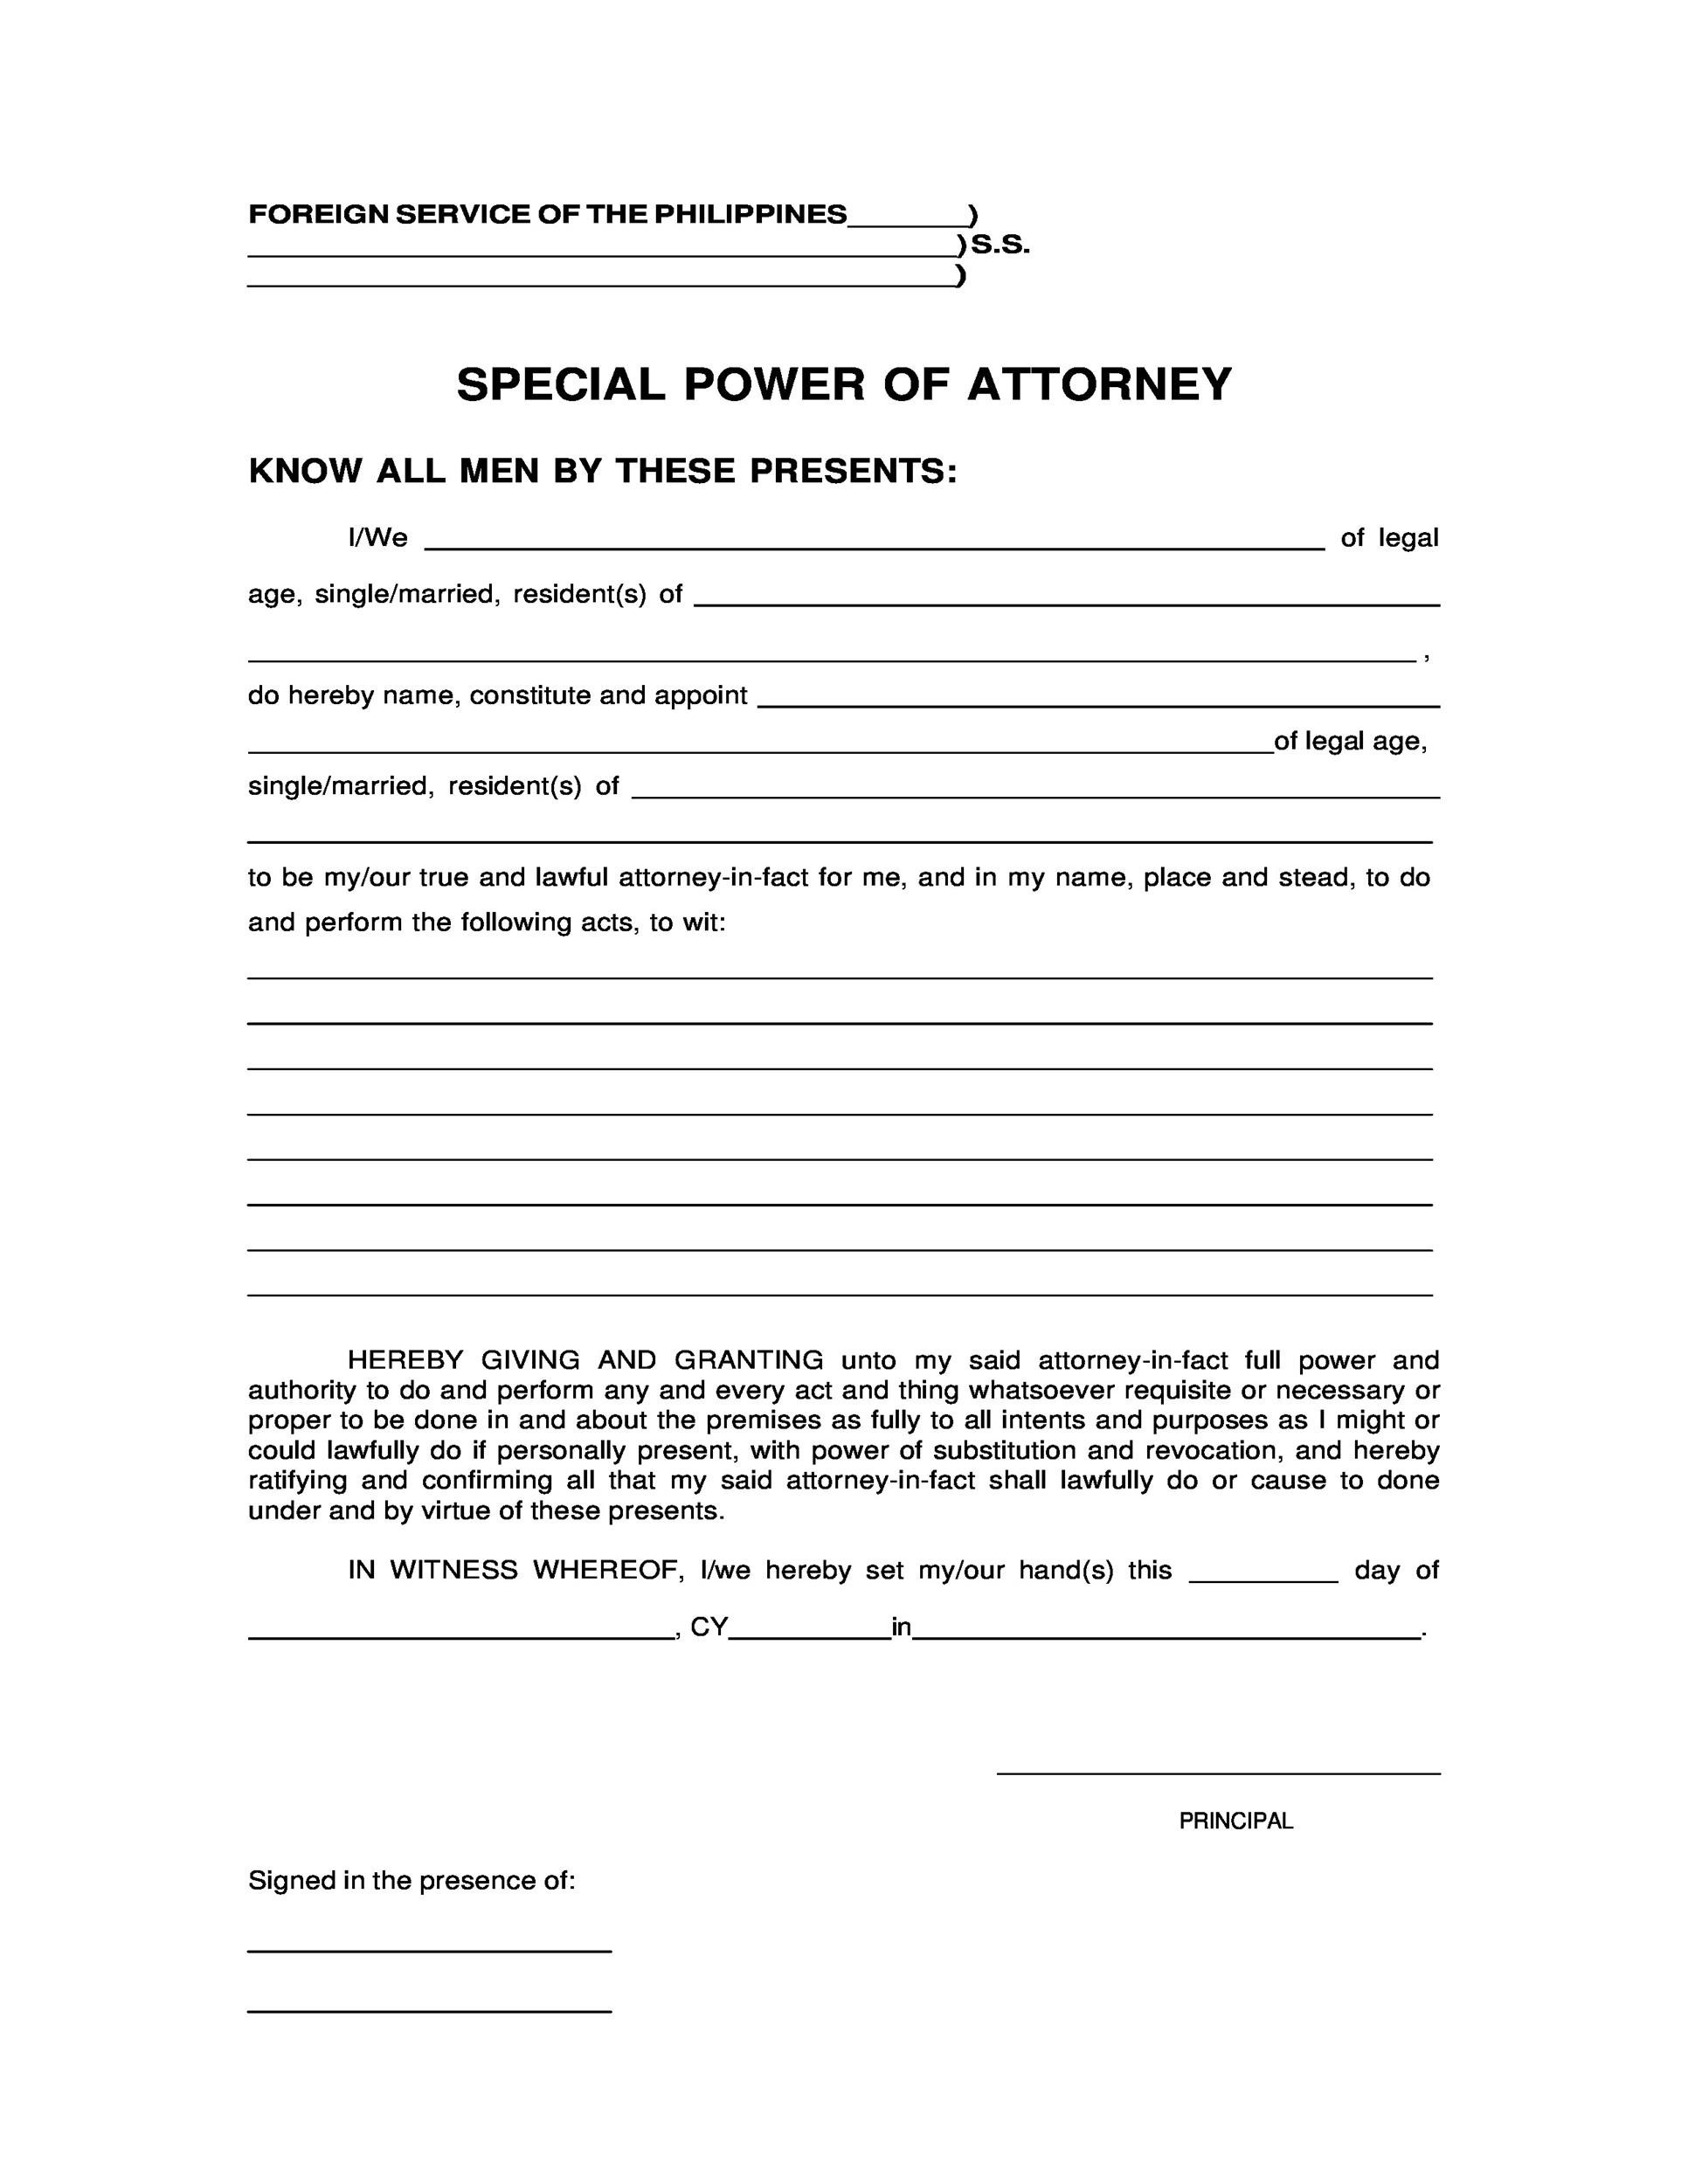 Some Comparing The Power Of Attorney Form Business Blog